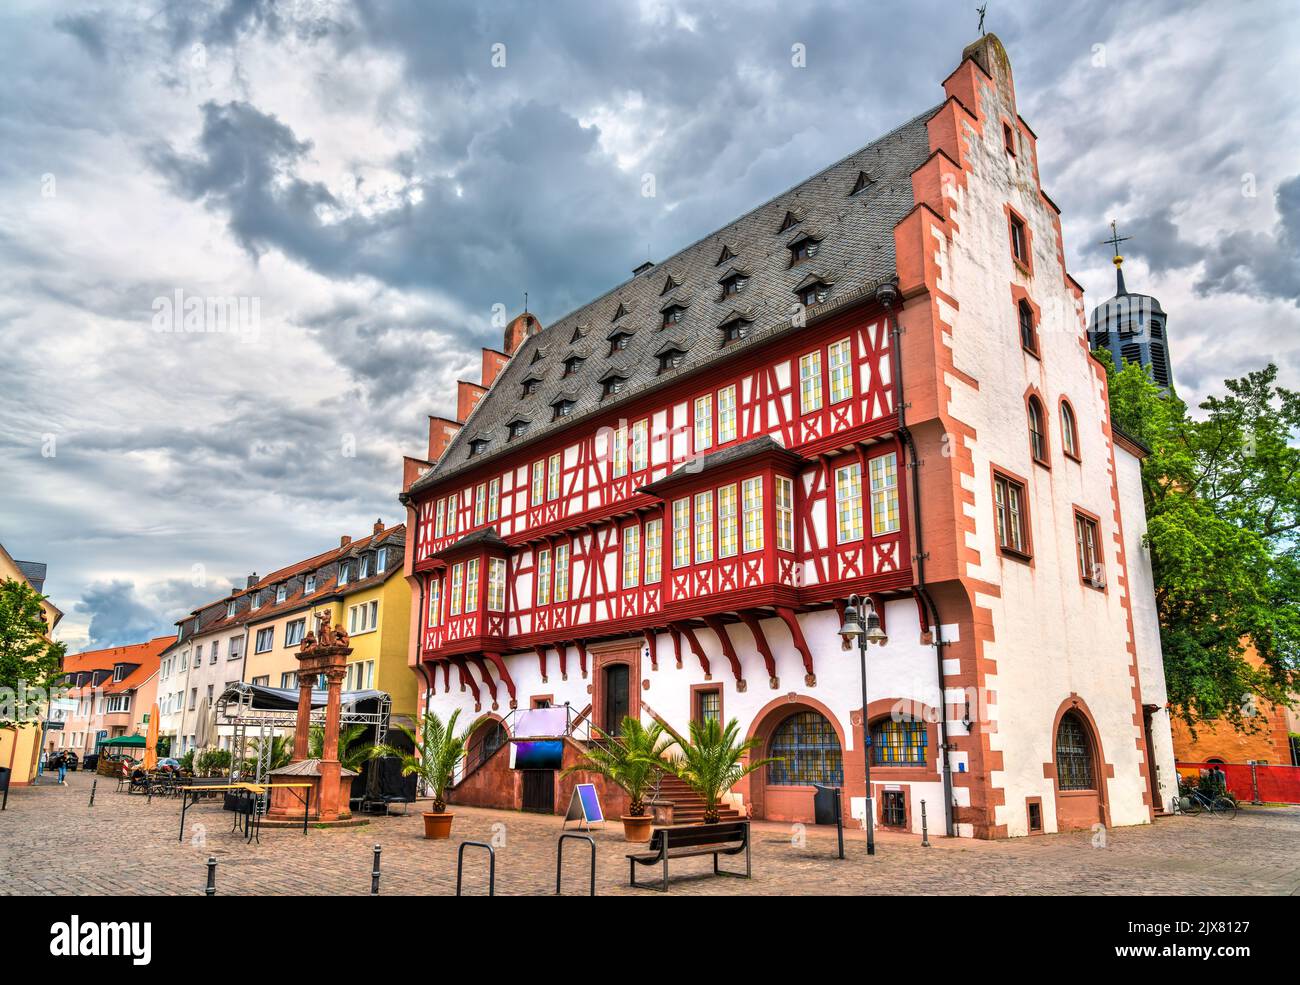 Traditional architecture of Hanau in Hessen, Germany Stock Photo